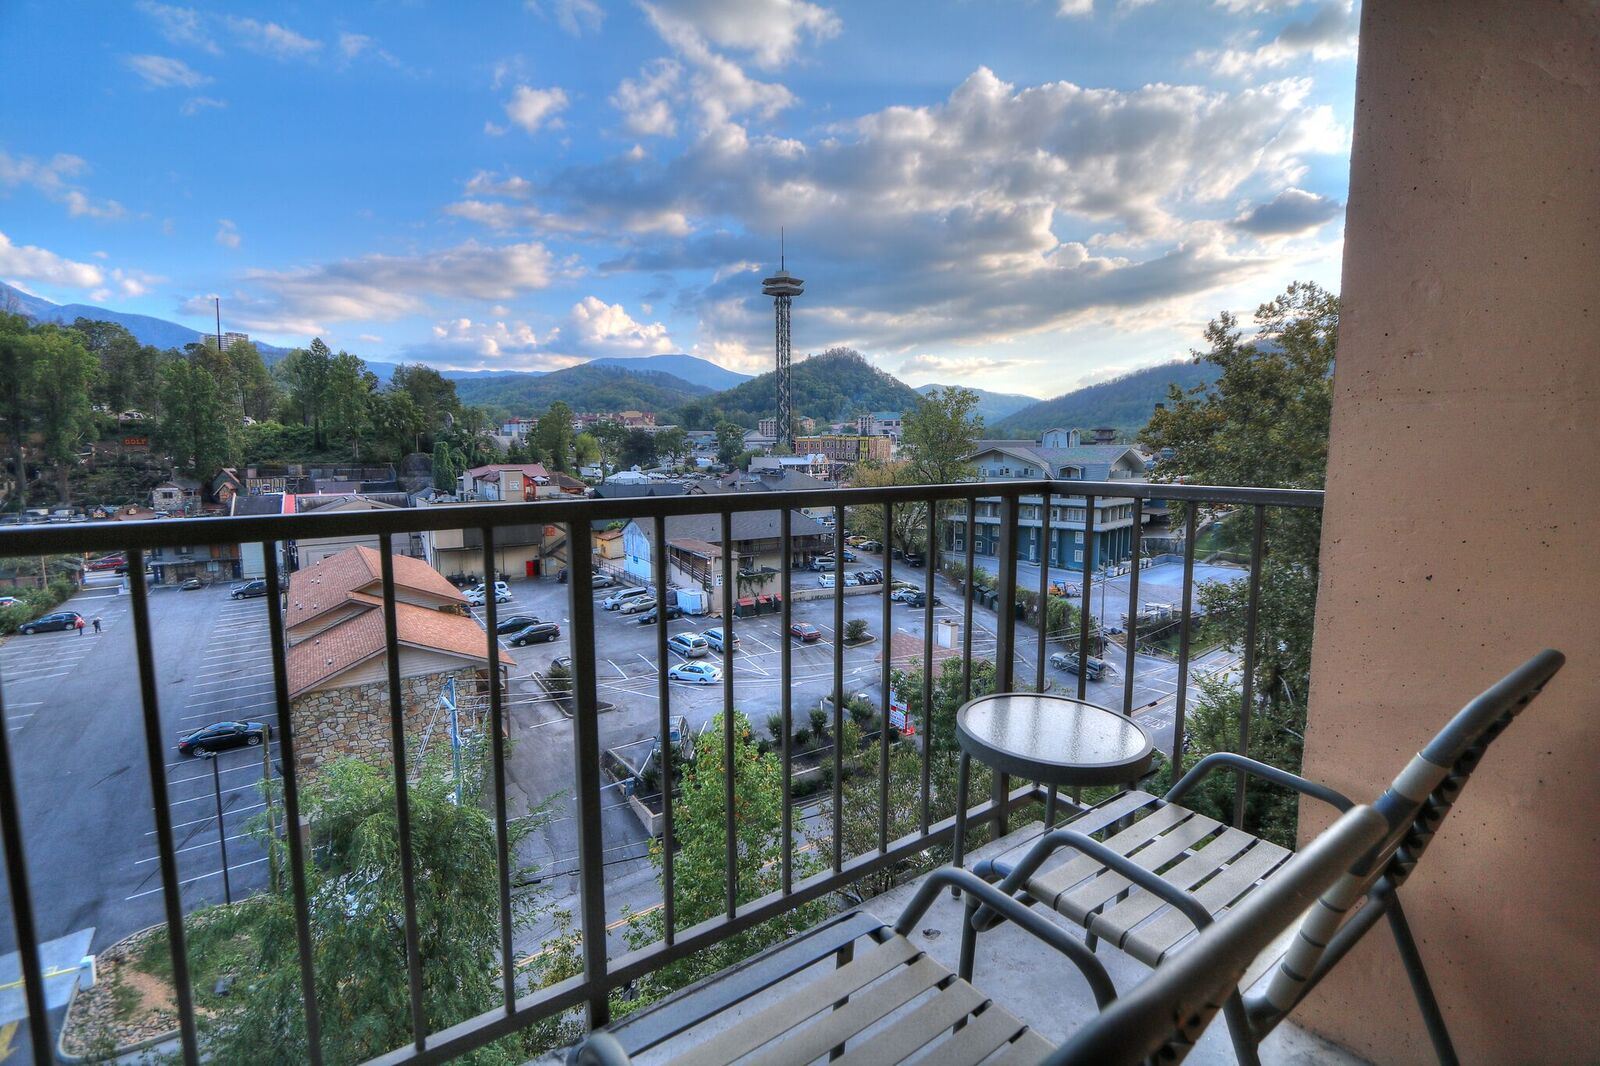 Top 5 Reasons You Need to Stay at Our Downtown Gatlinburg Hotel